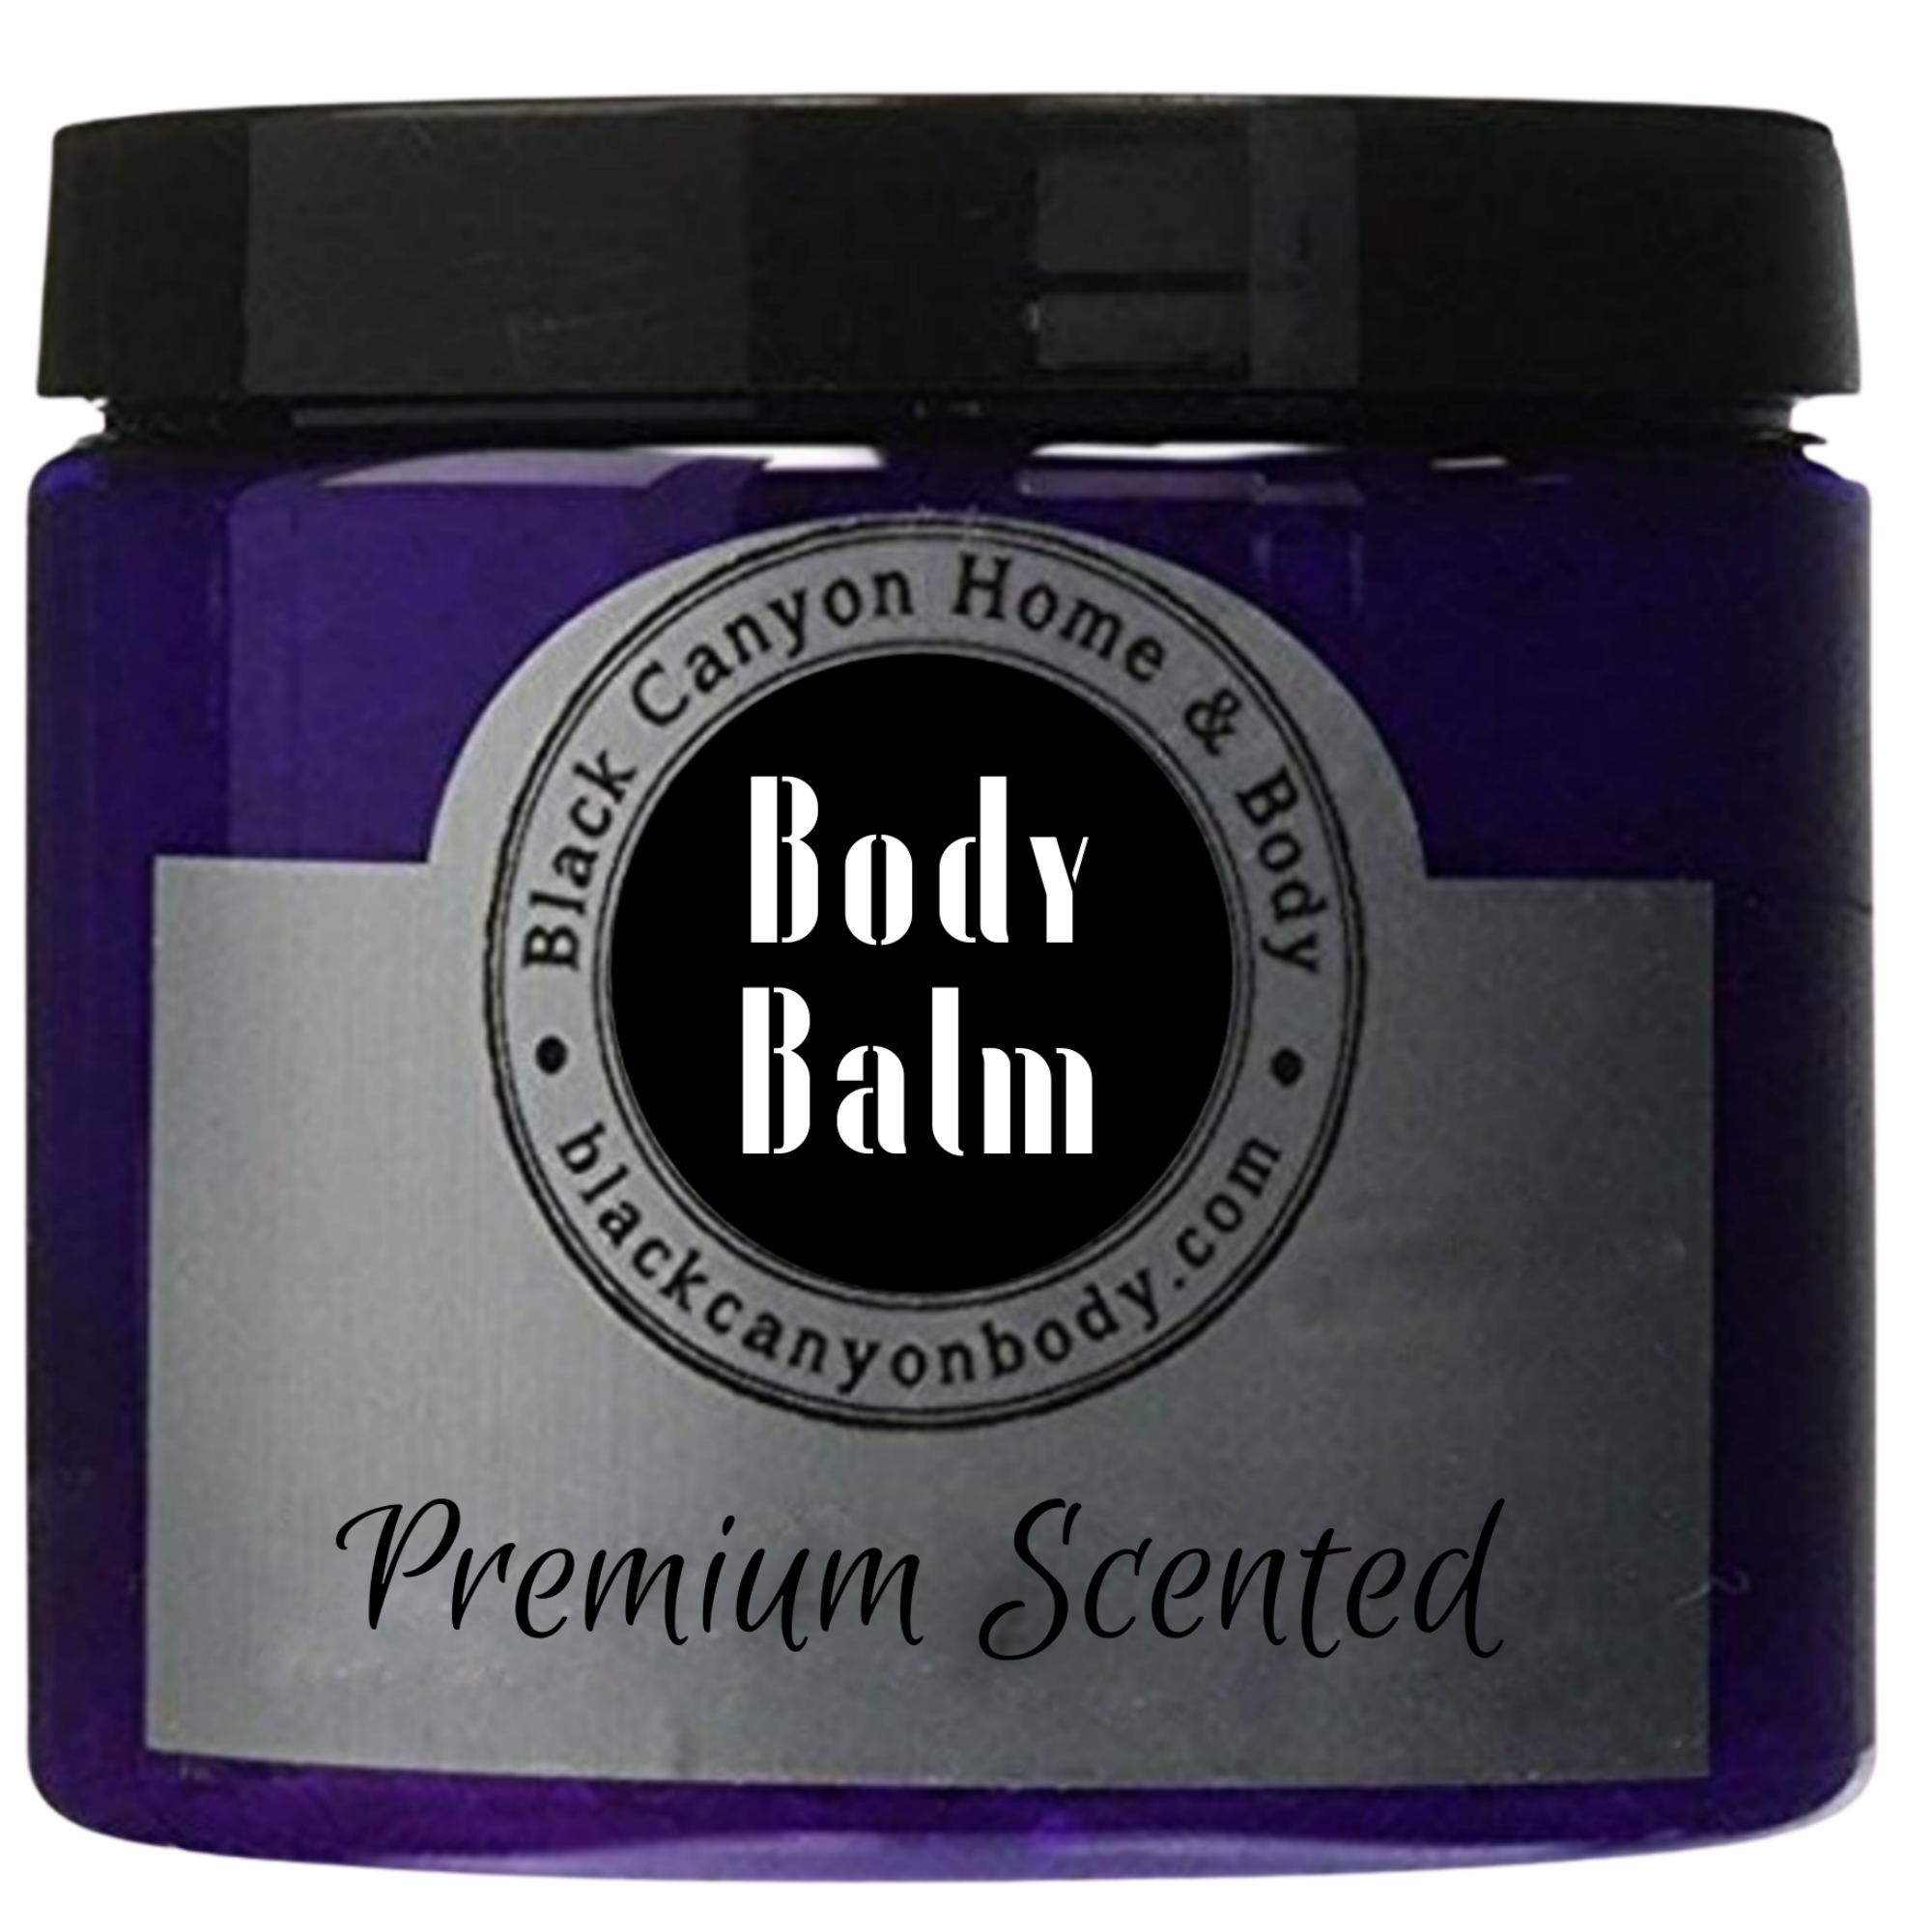 Black Canyon Black Cherry Cream Scented Natural Body Balm with Shea